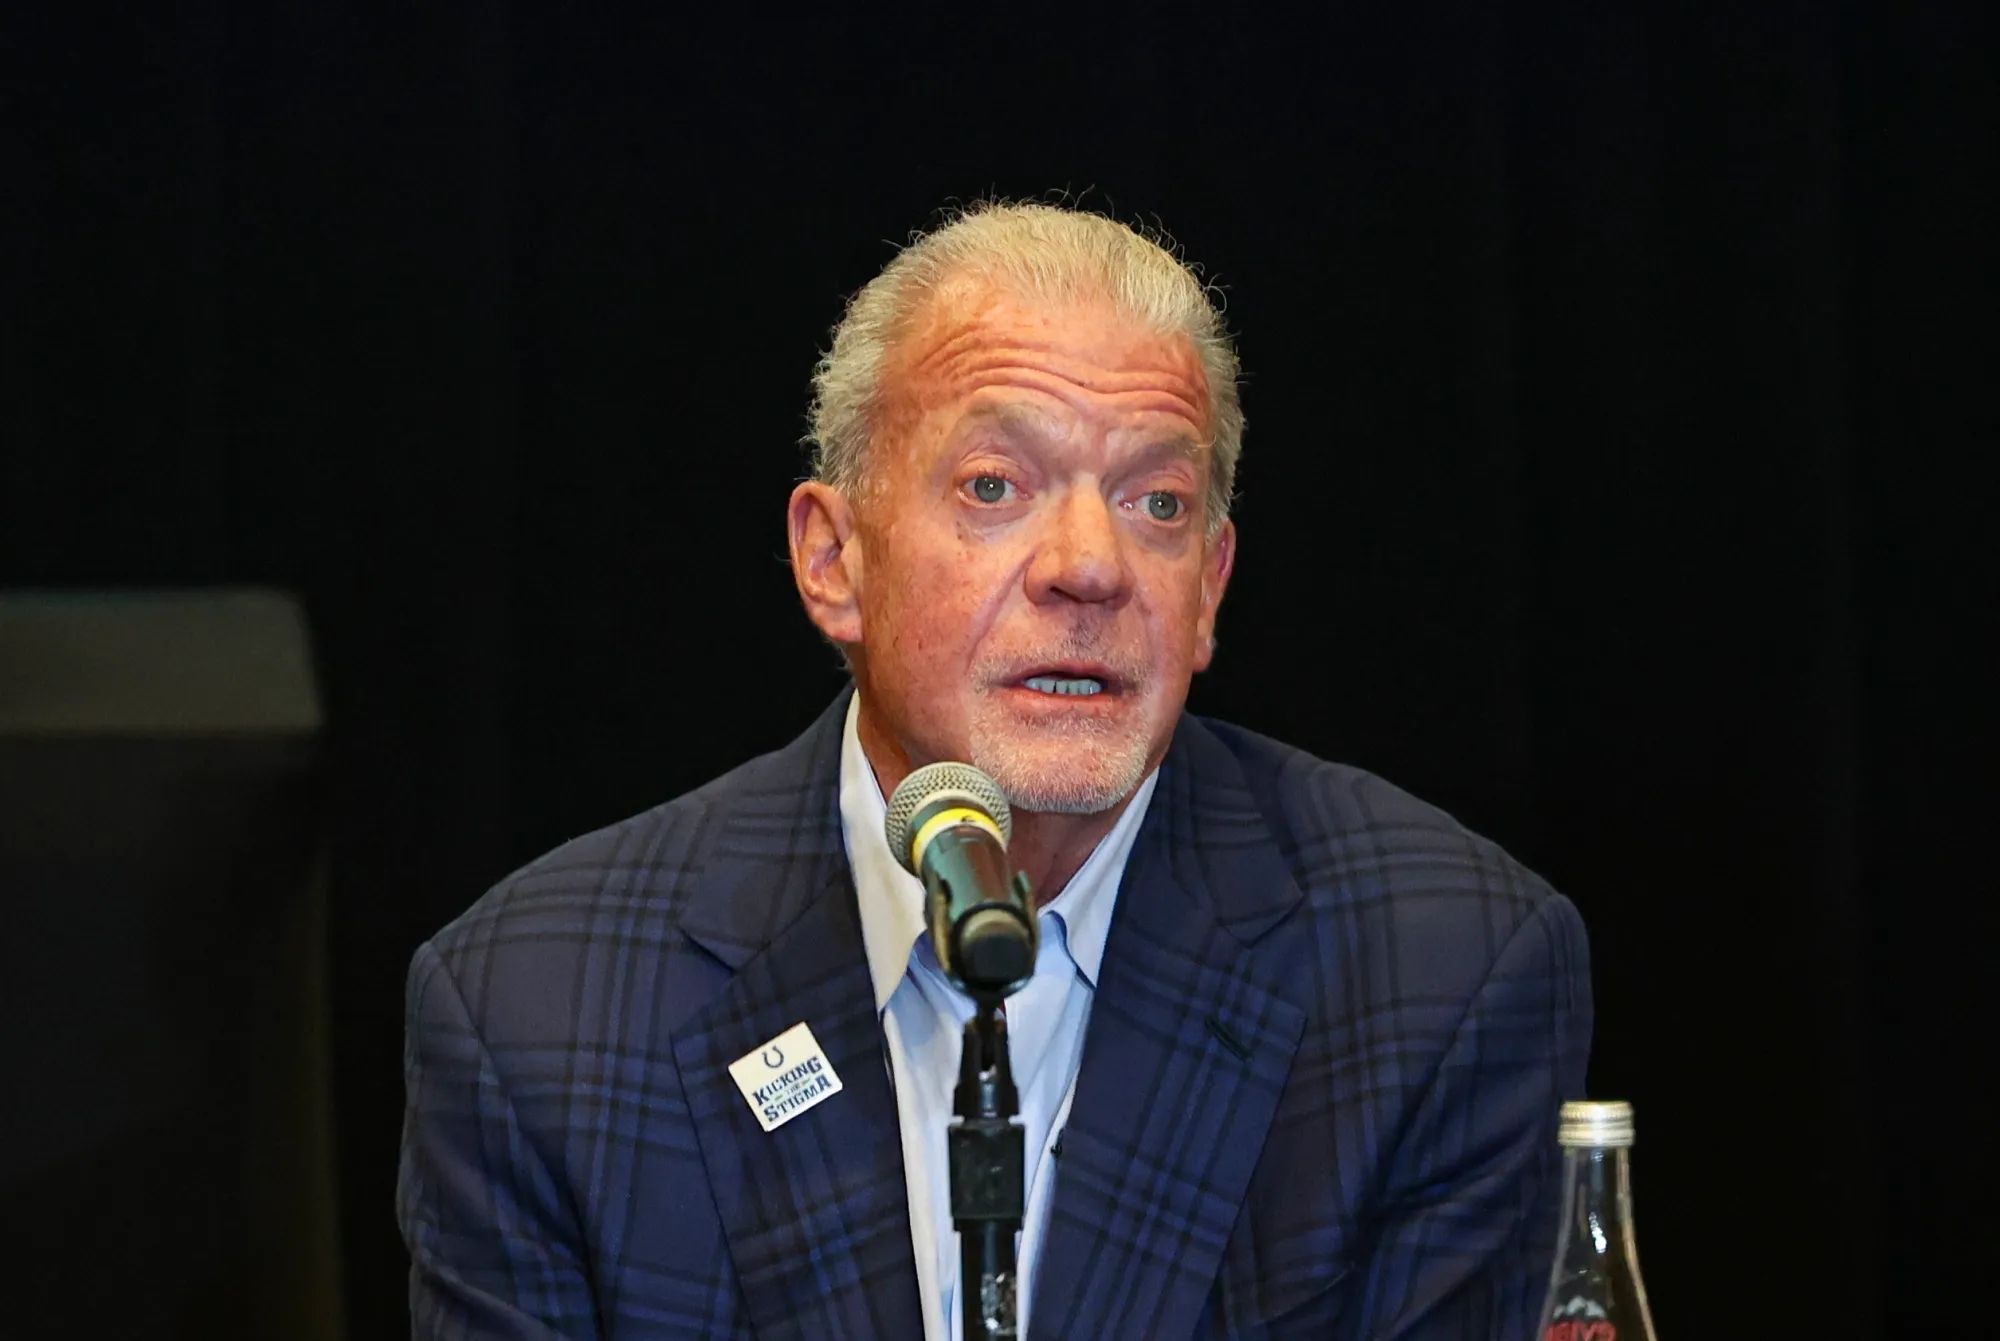 Jim Irsay On 2014 Arrest: Claims Prejudice Because He’s A Rich, White Billionaire